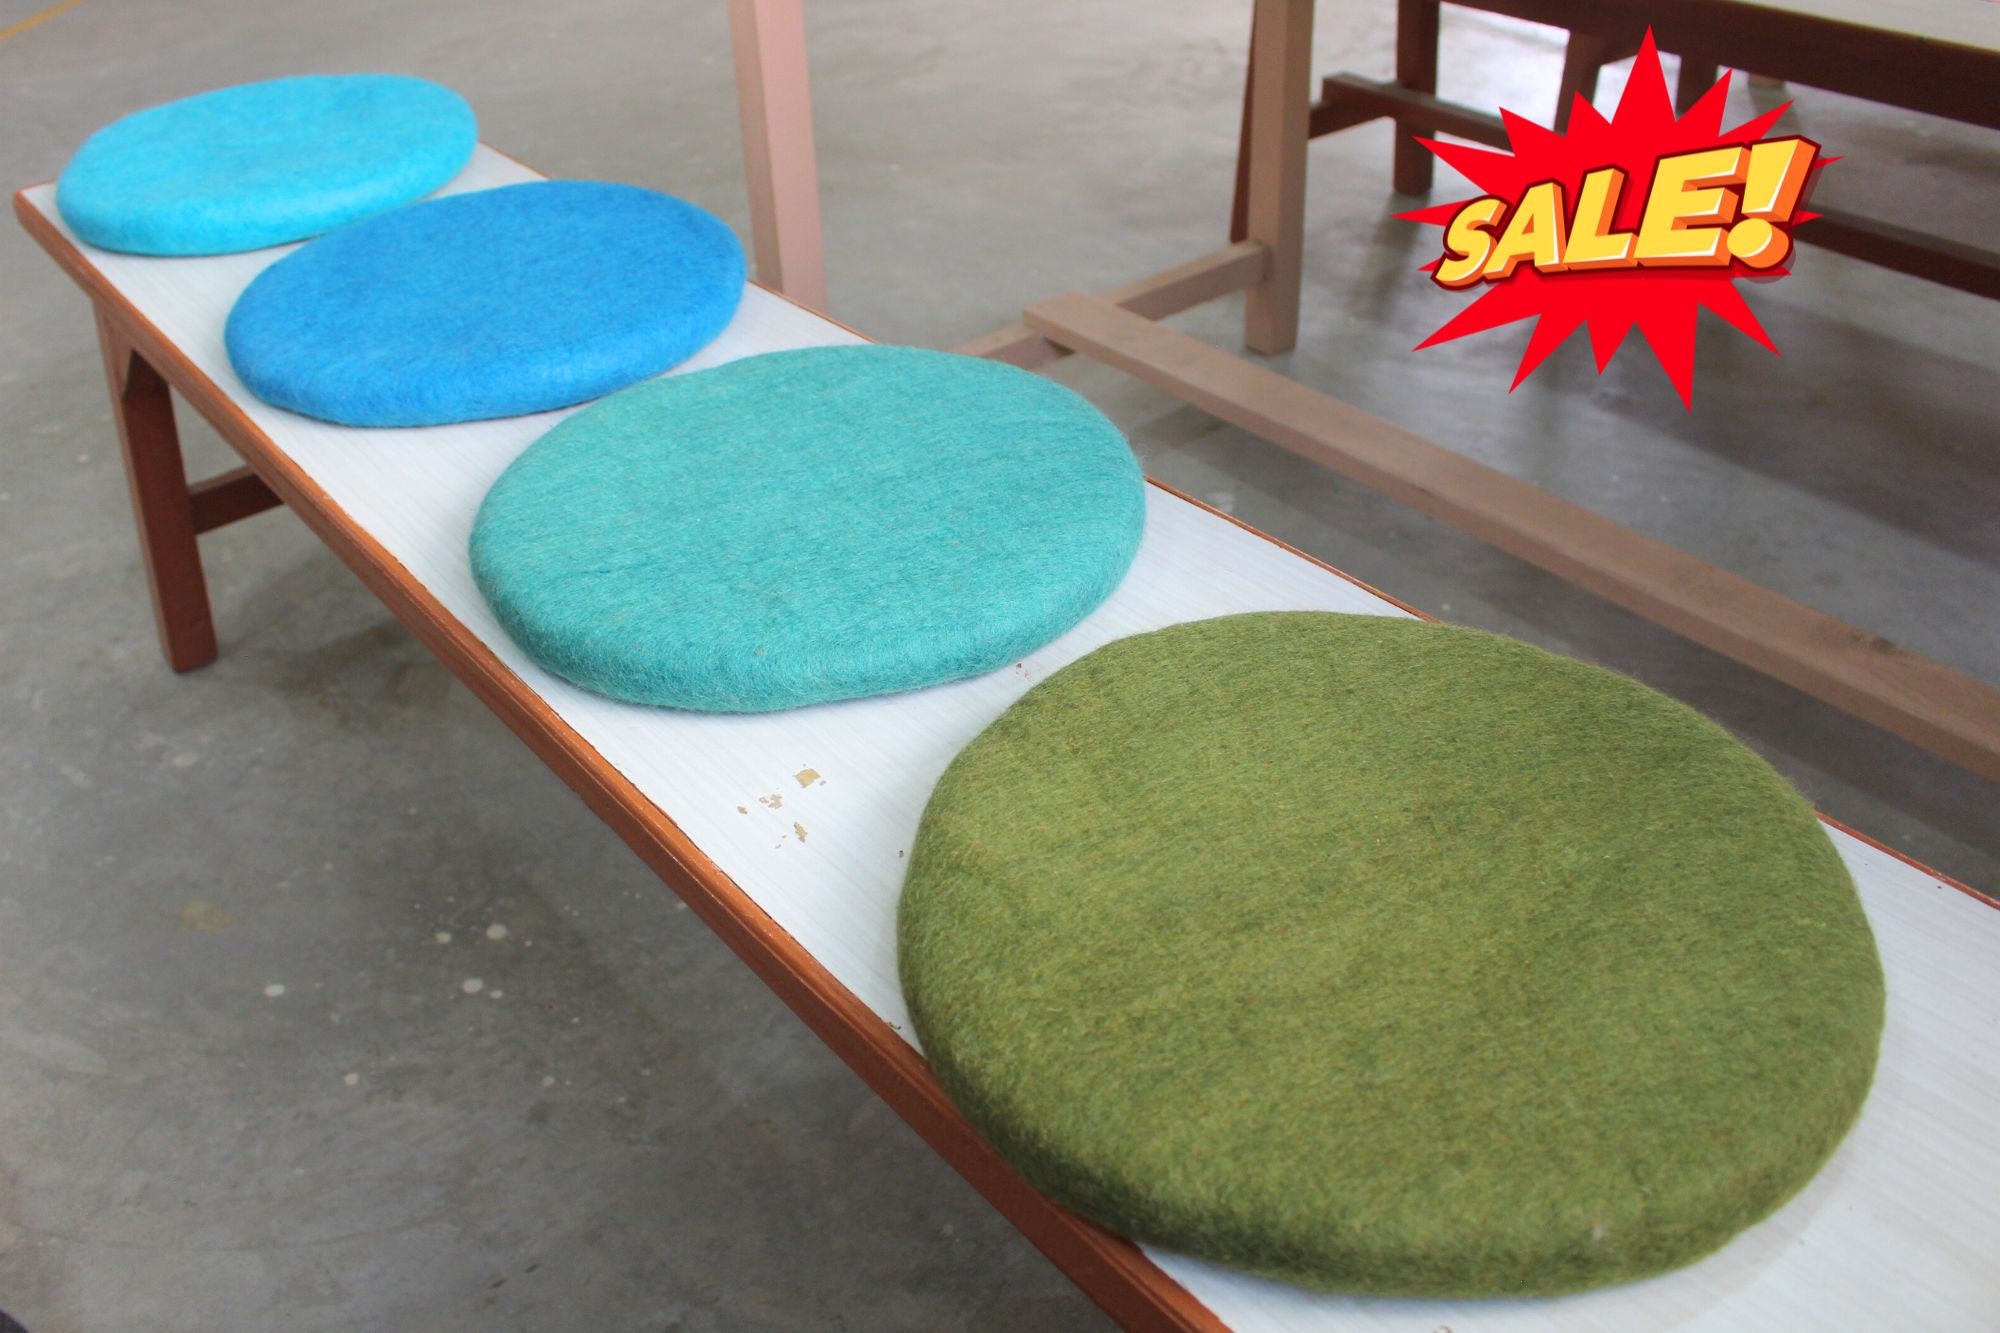 35cm Wool Felted Seat Pad Round Thick Chair Cushion for Felt 